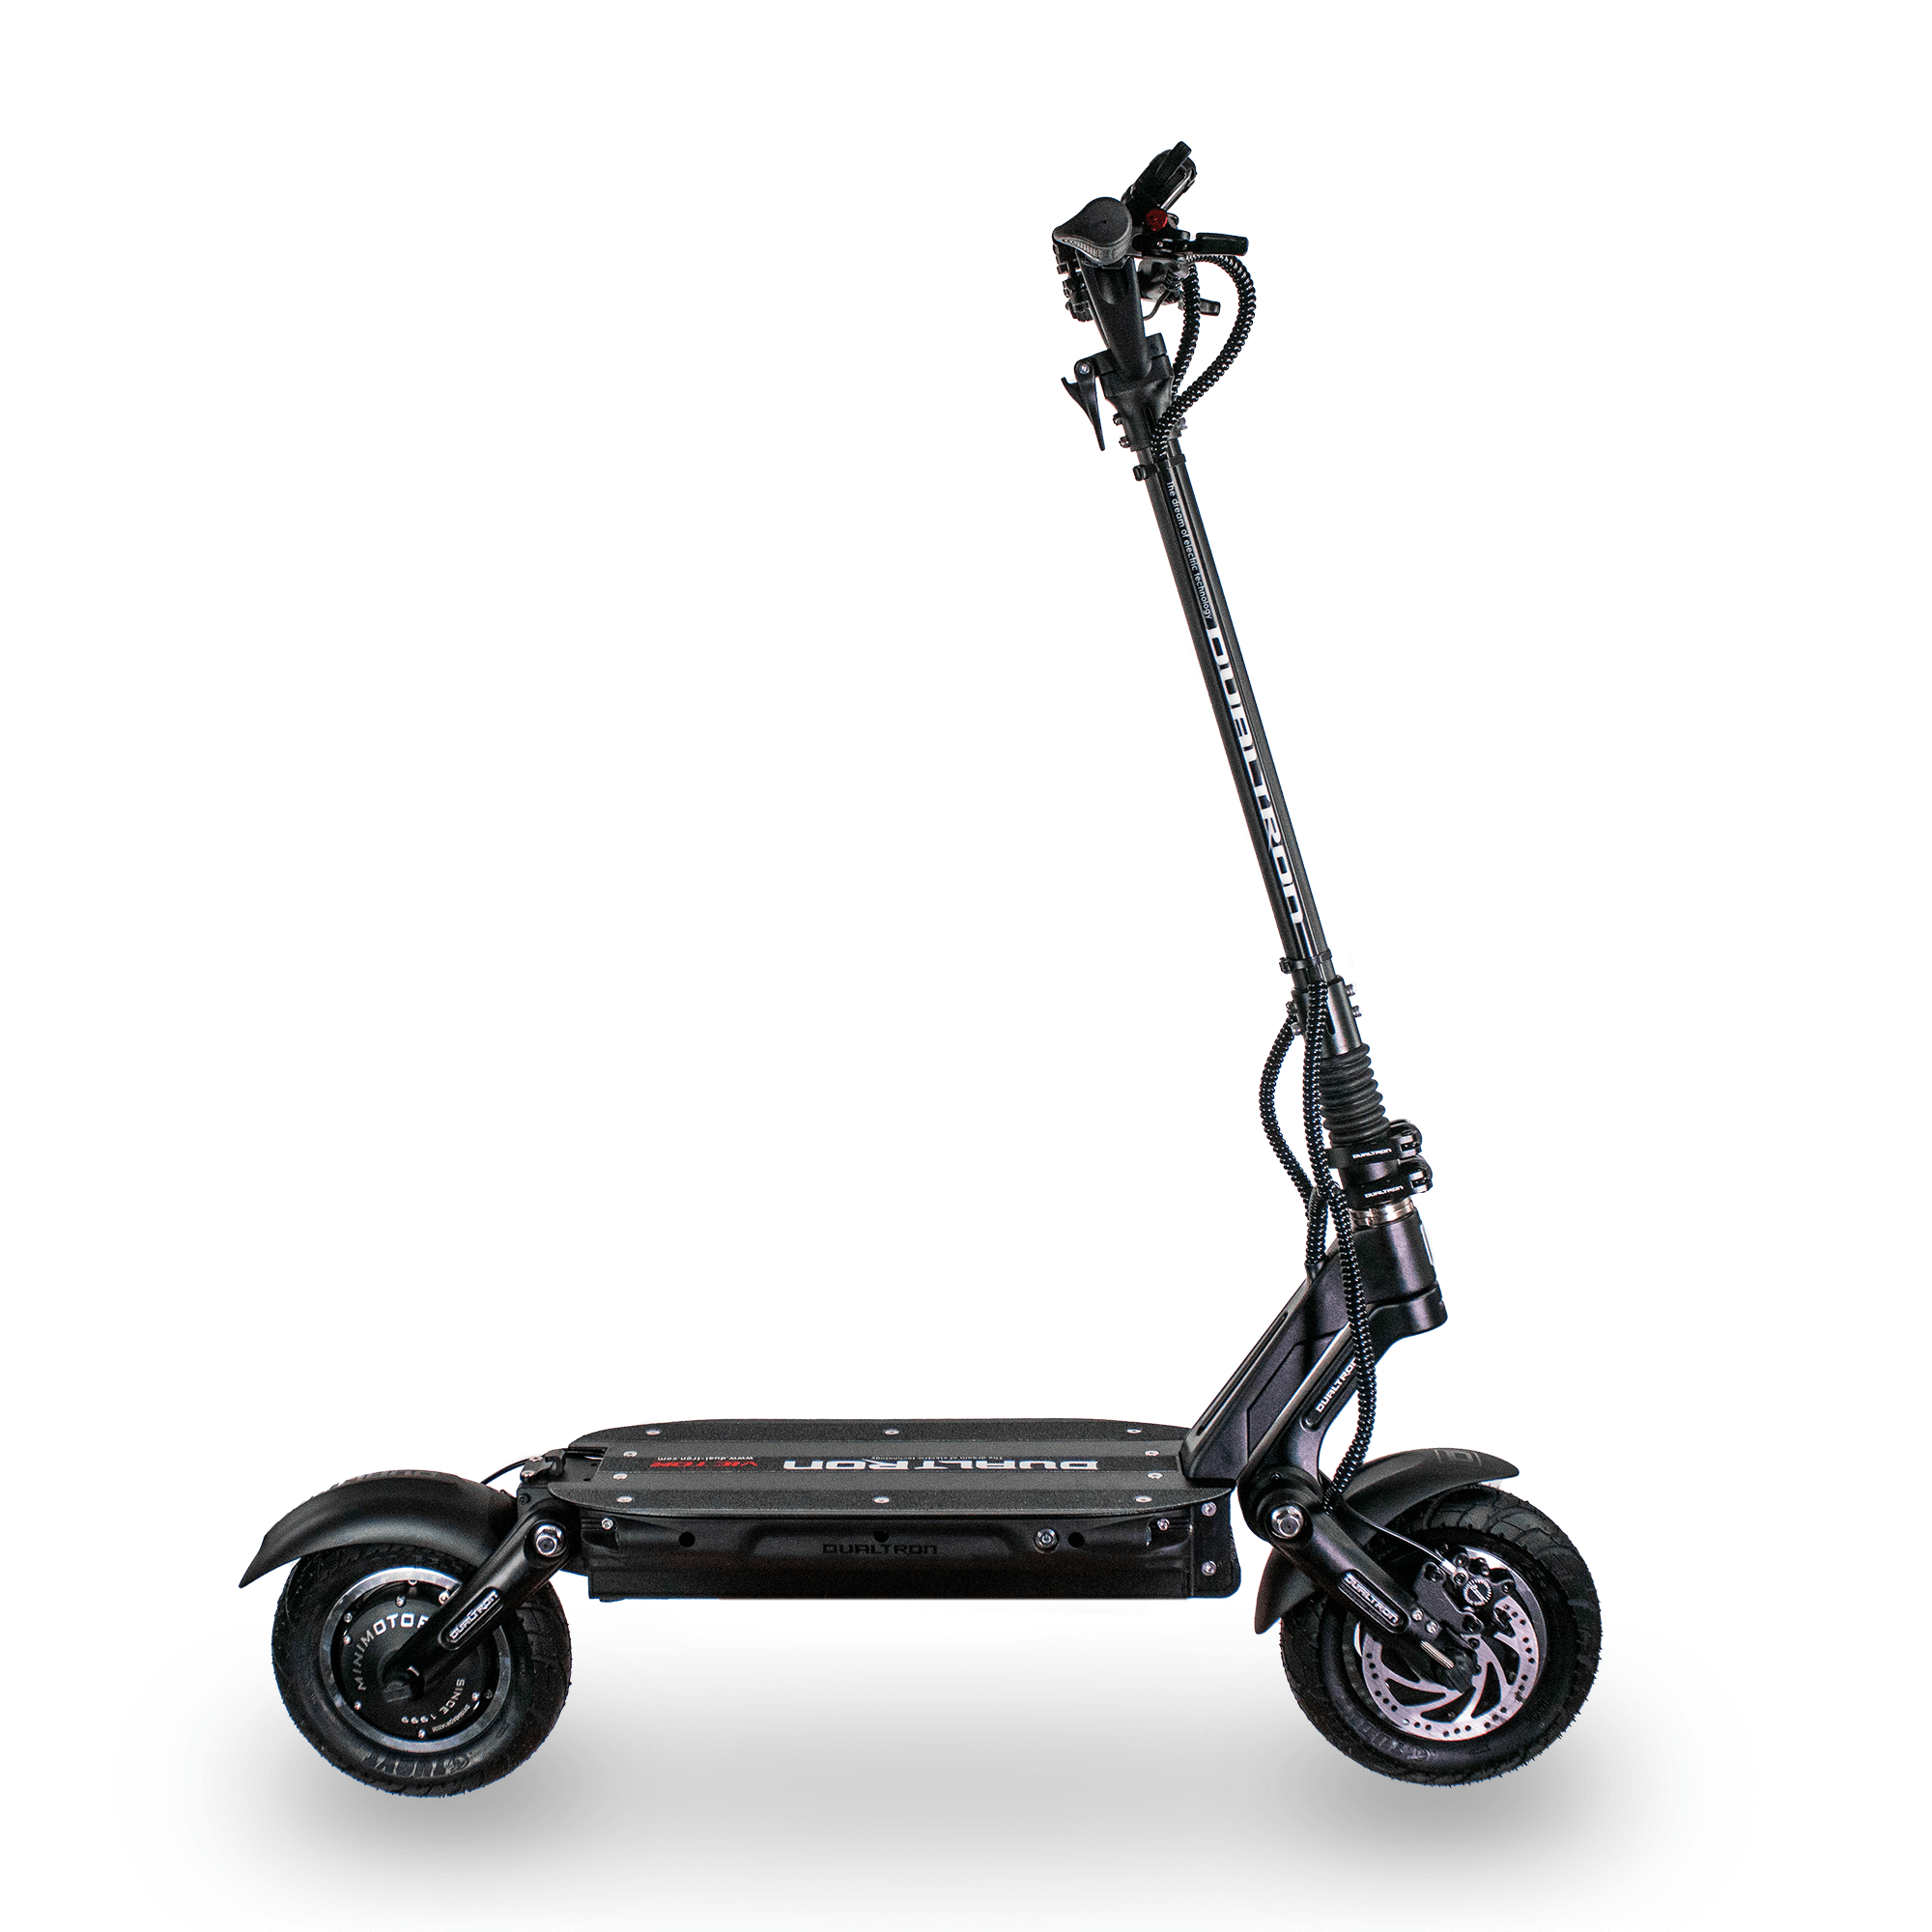 Dualtron Mini electric scooter in stock. - Enjoy the ride